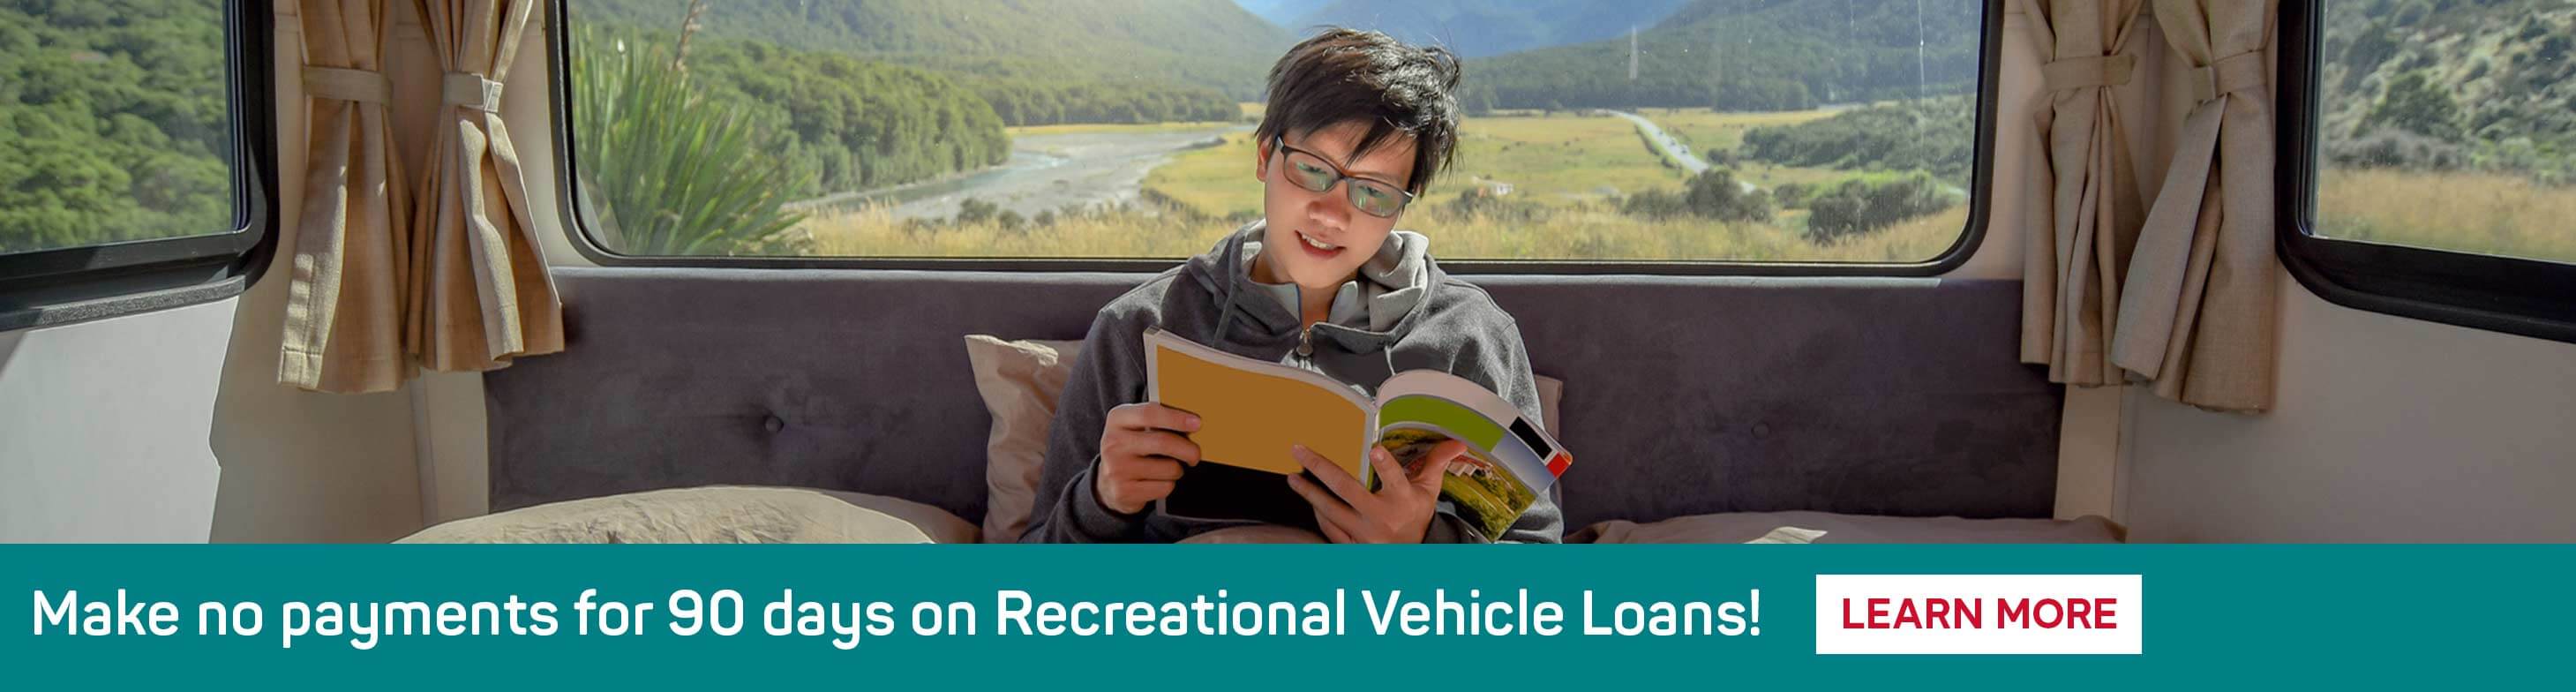 Make no payments for 90 days on Recreational Vehicle Loans!